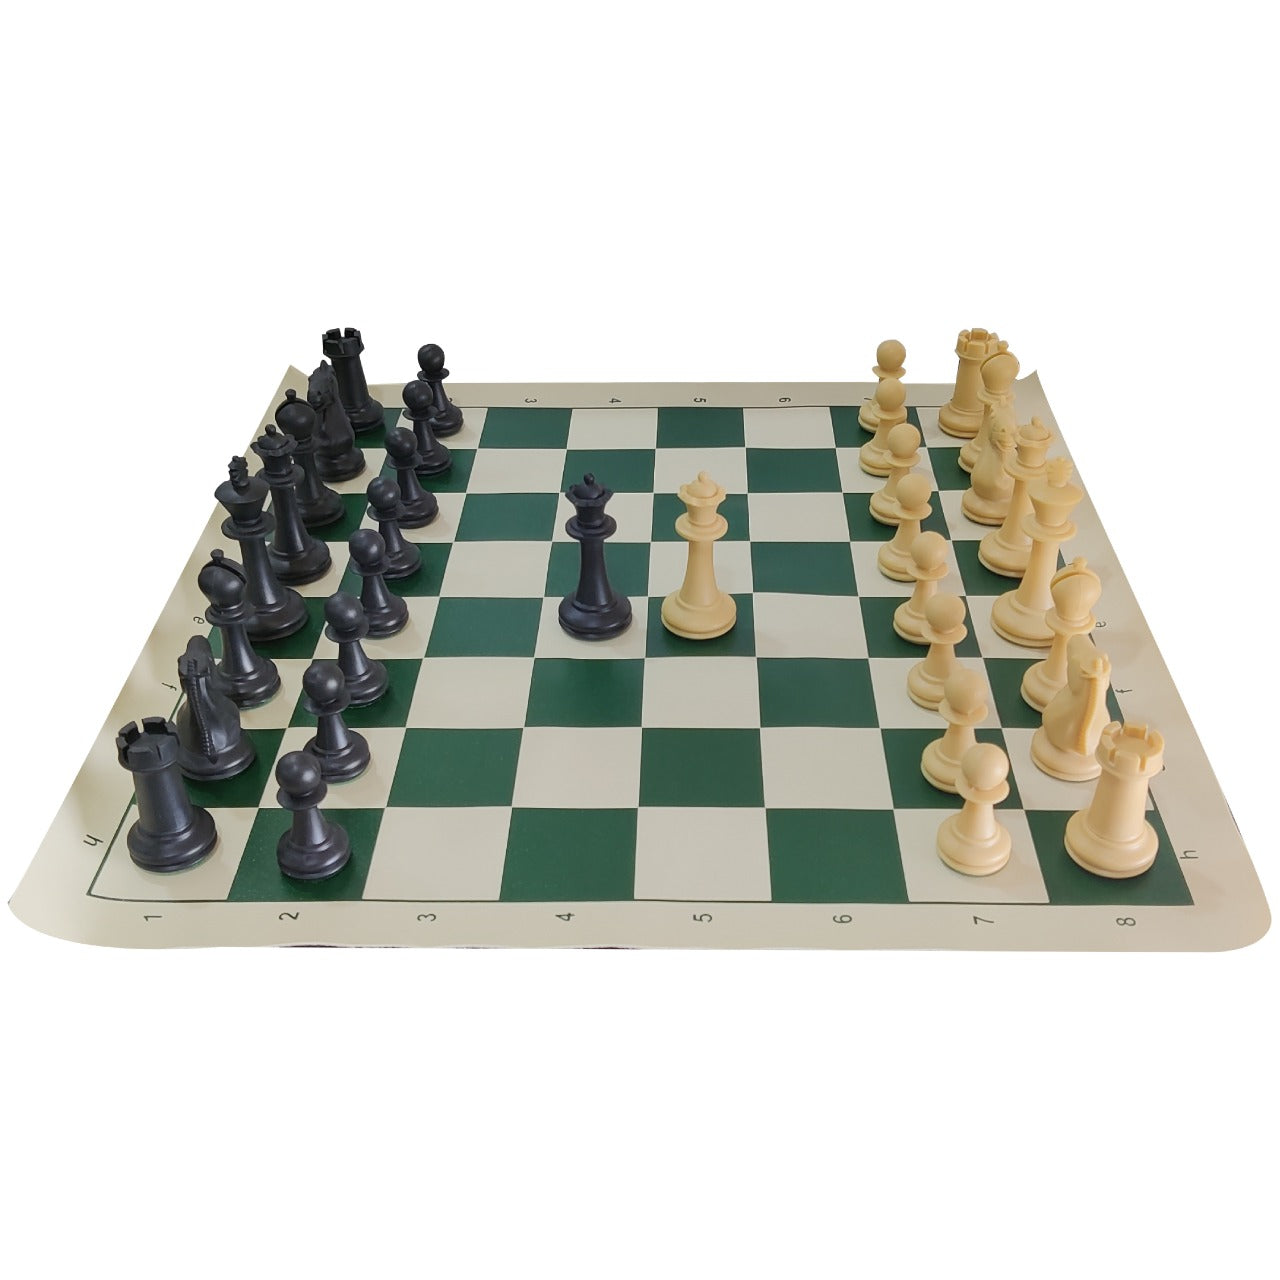 Gambol Triple Weighted Chess Pieces 1.2KG (Ivory)